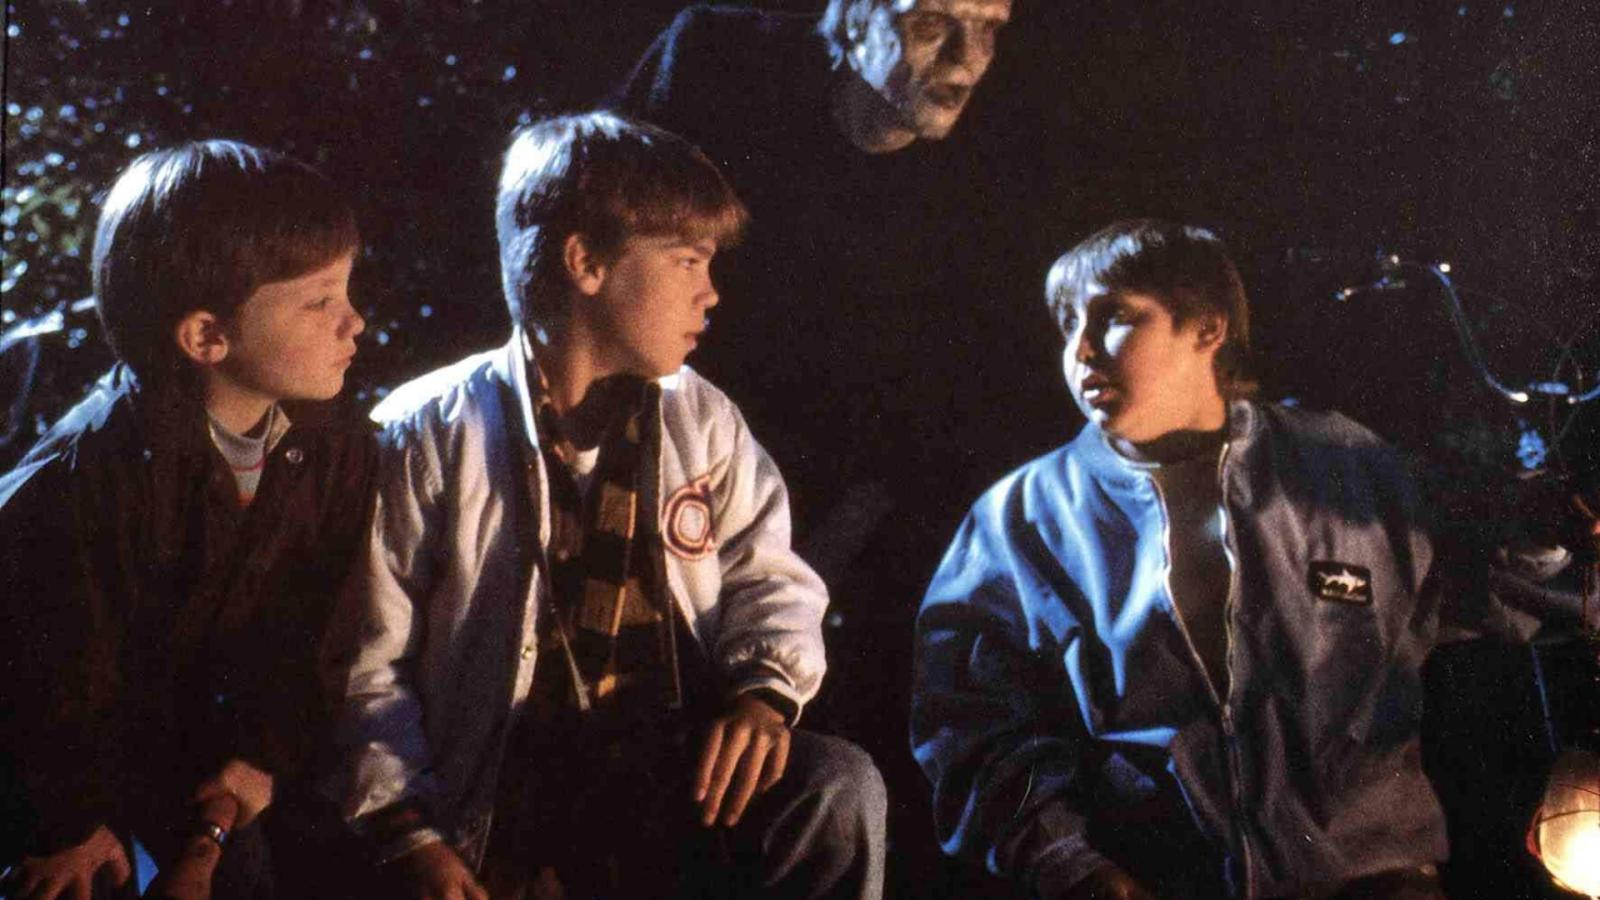 15 Scary Movies to Watch With Kids This Halloween Instead of Trick-or-Treating - image 5